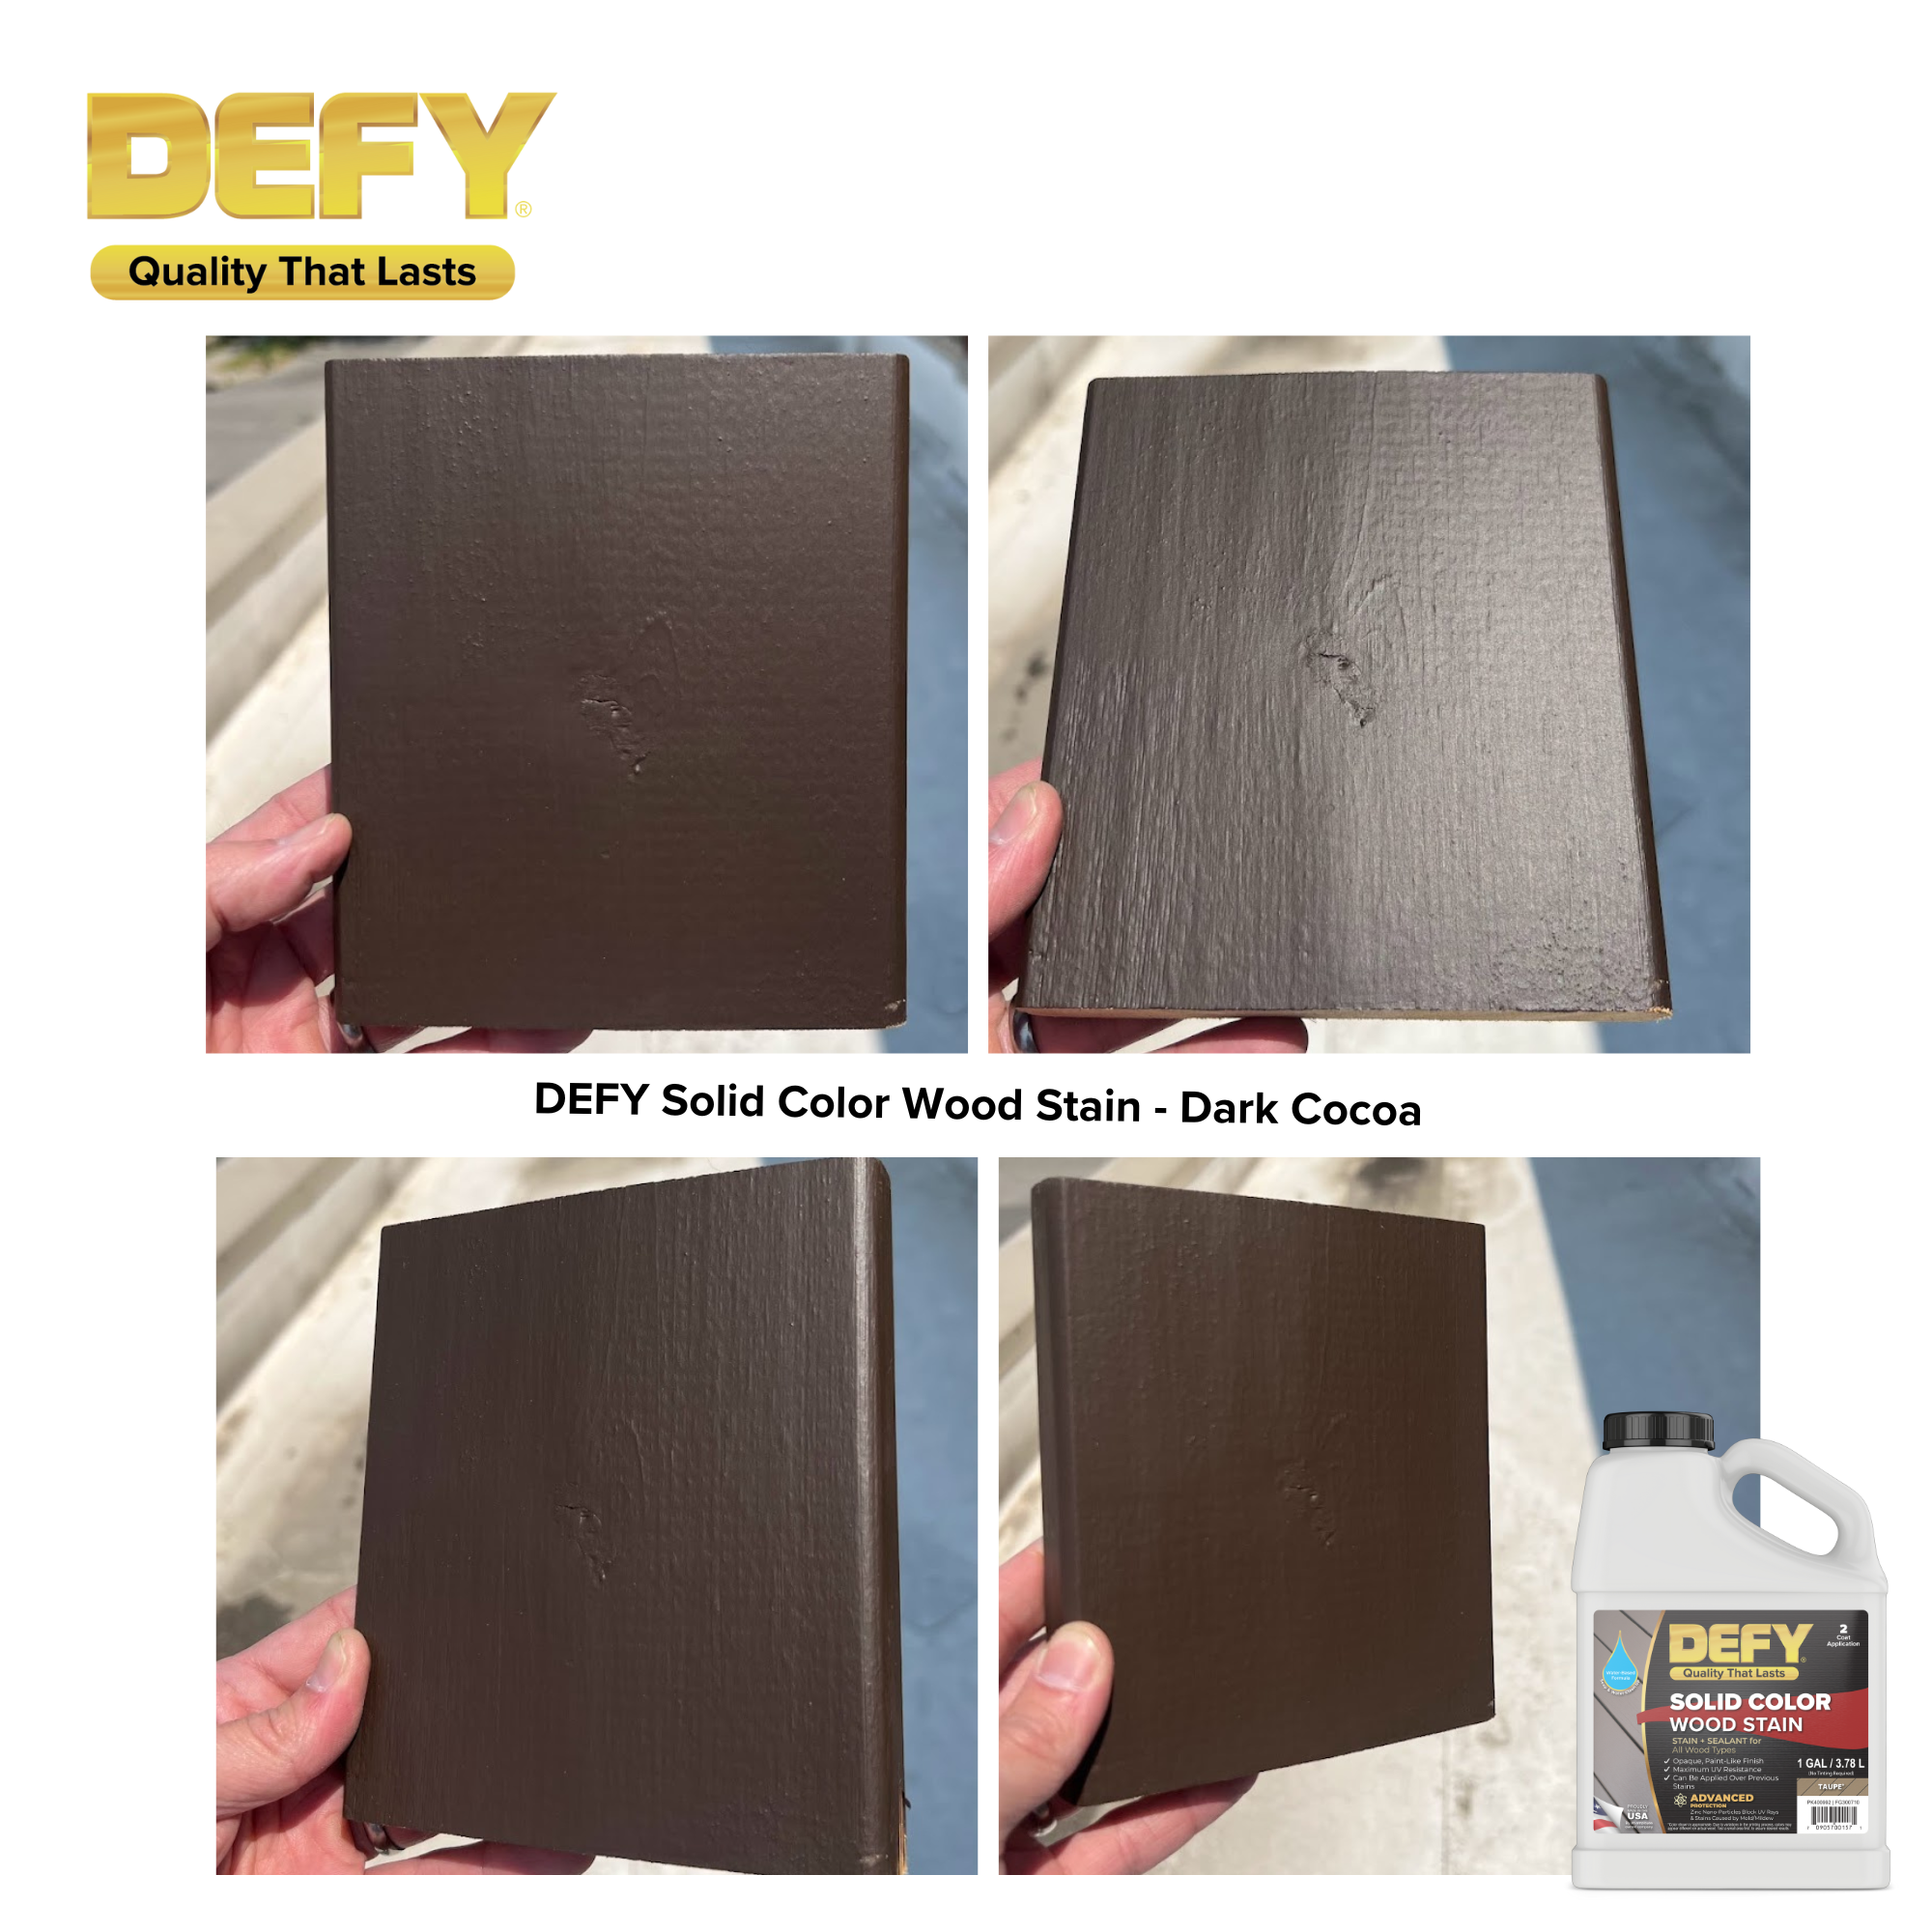 DEFY Solid Stain Samples